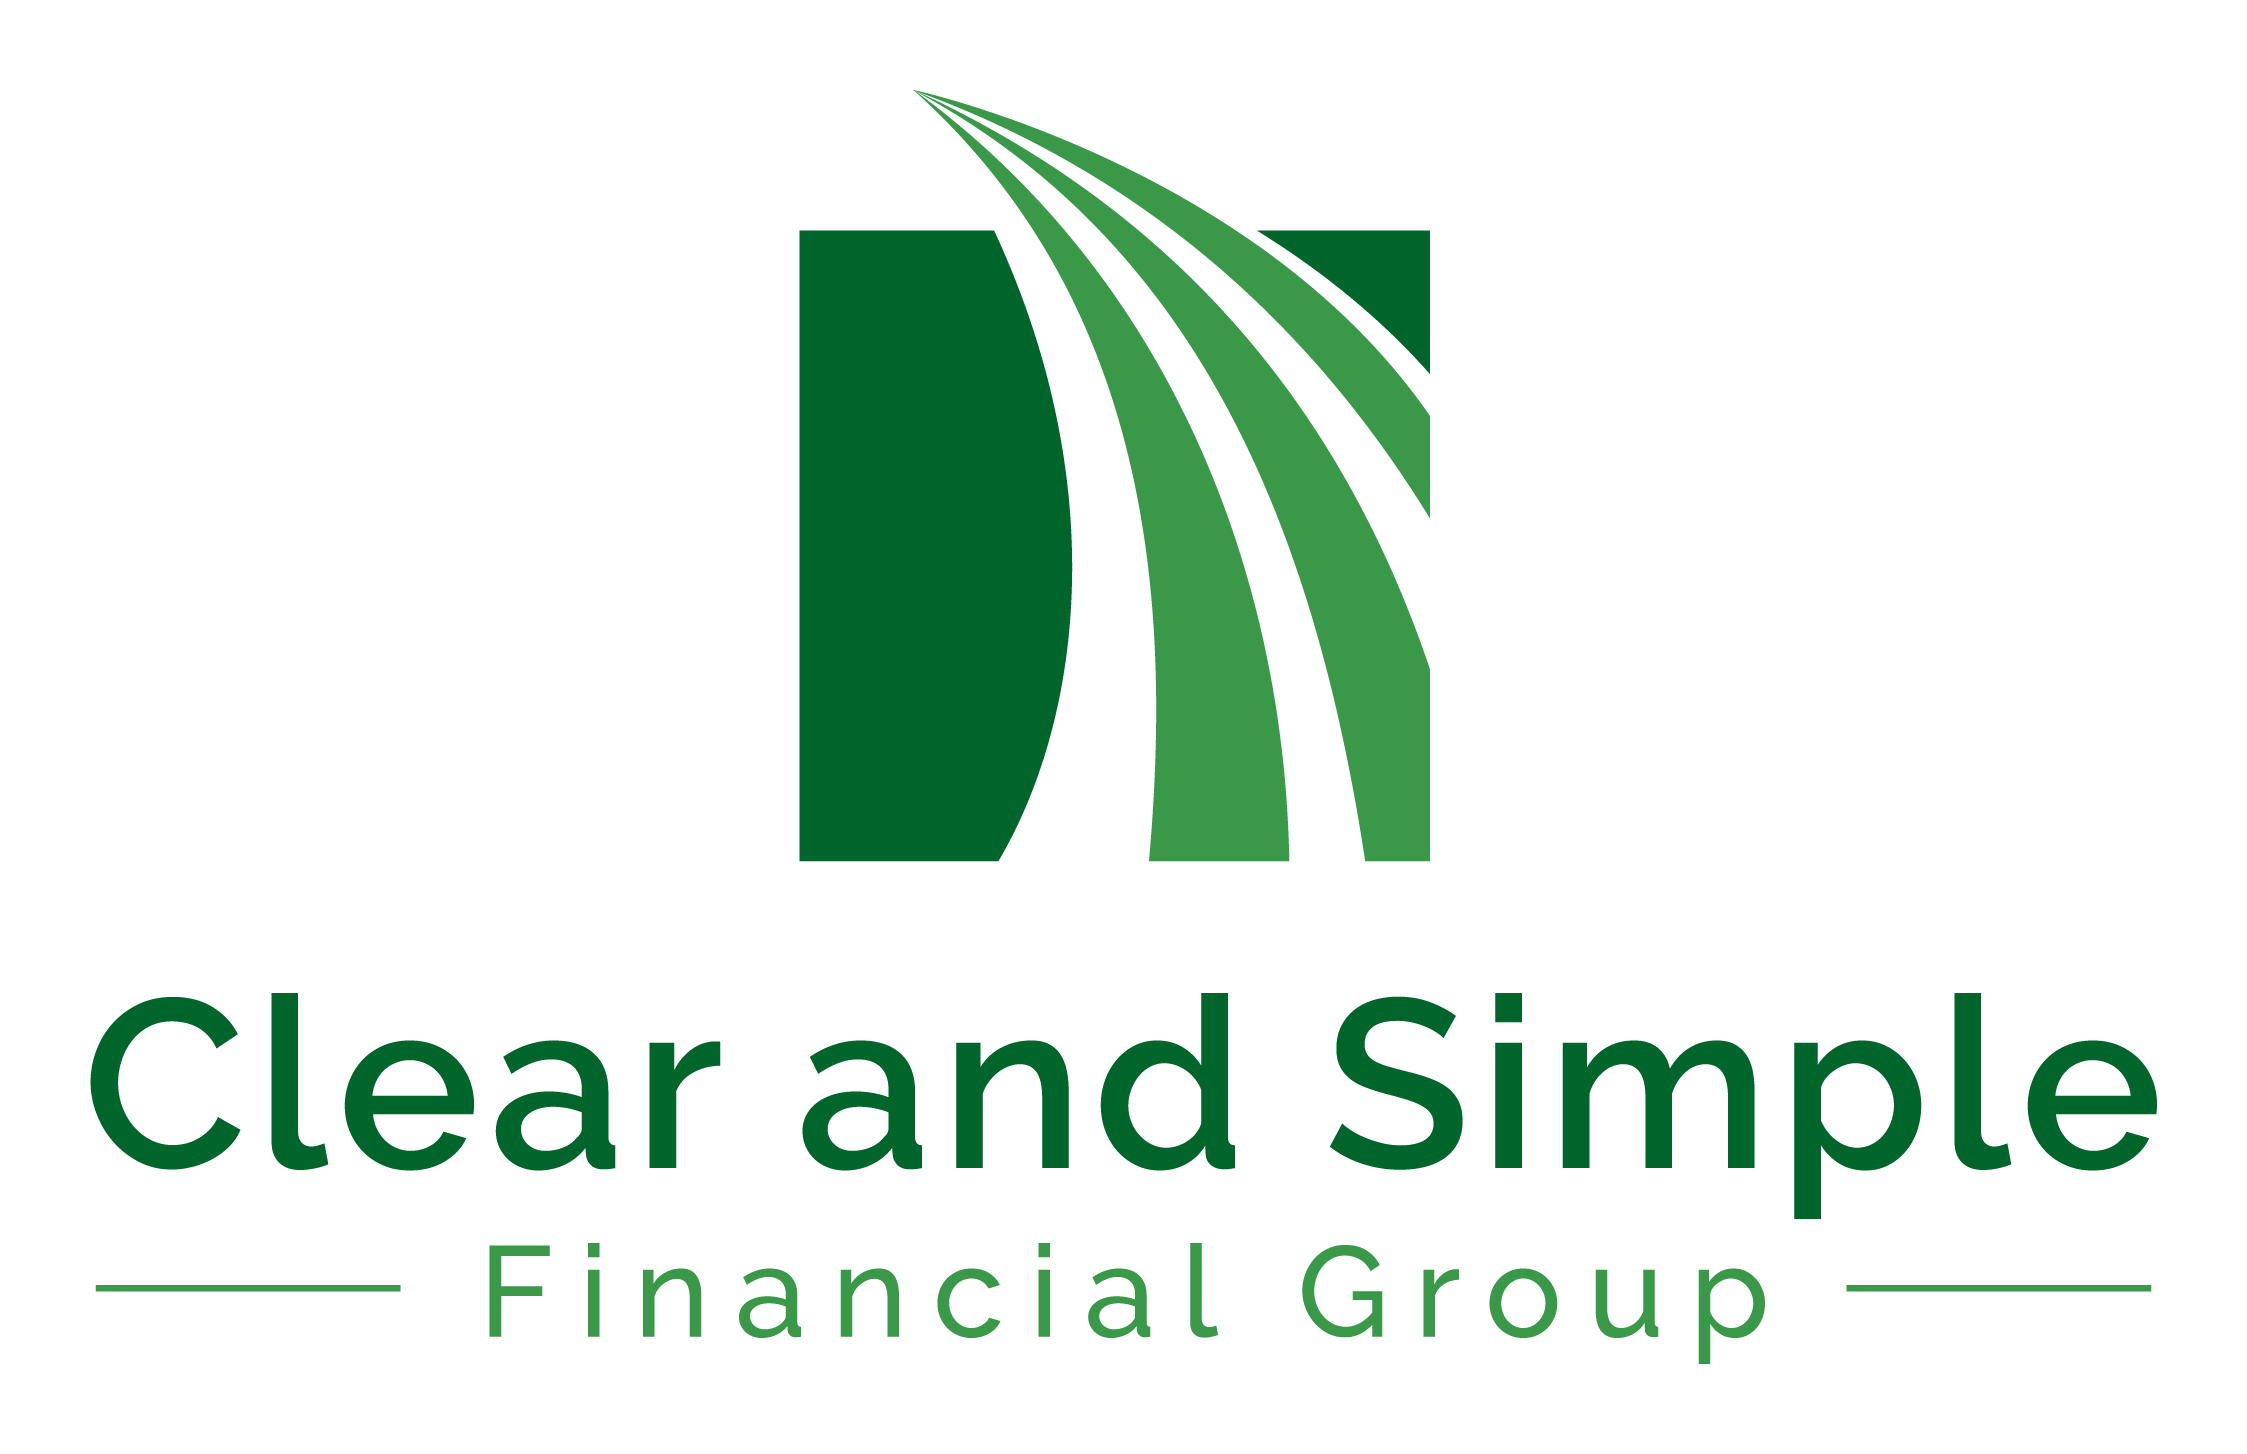 Clear and Simple Financial Group